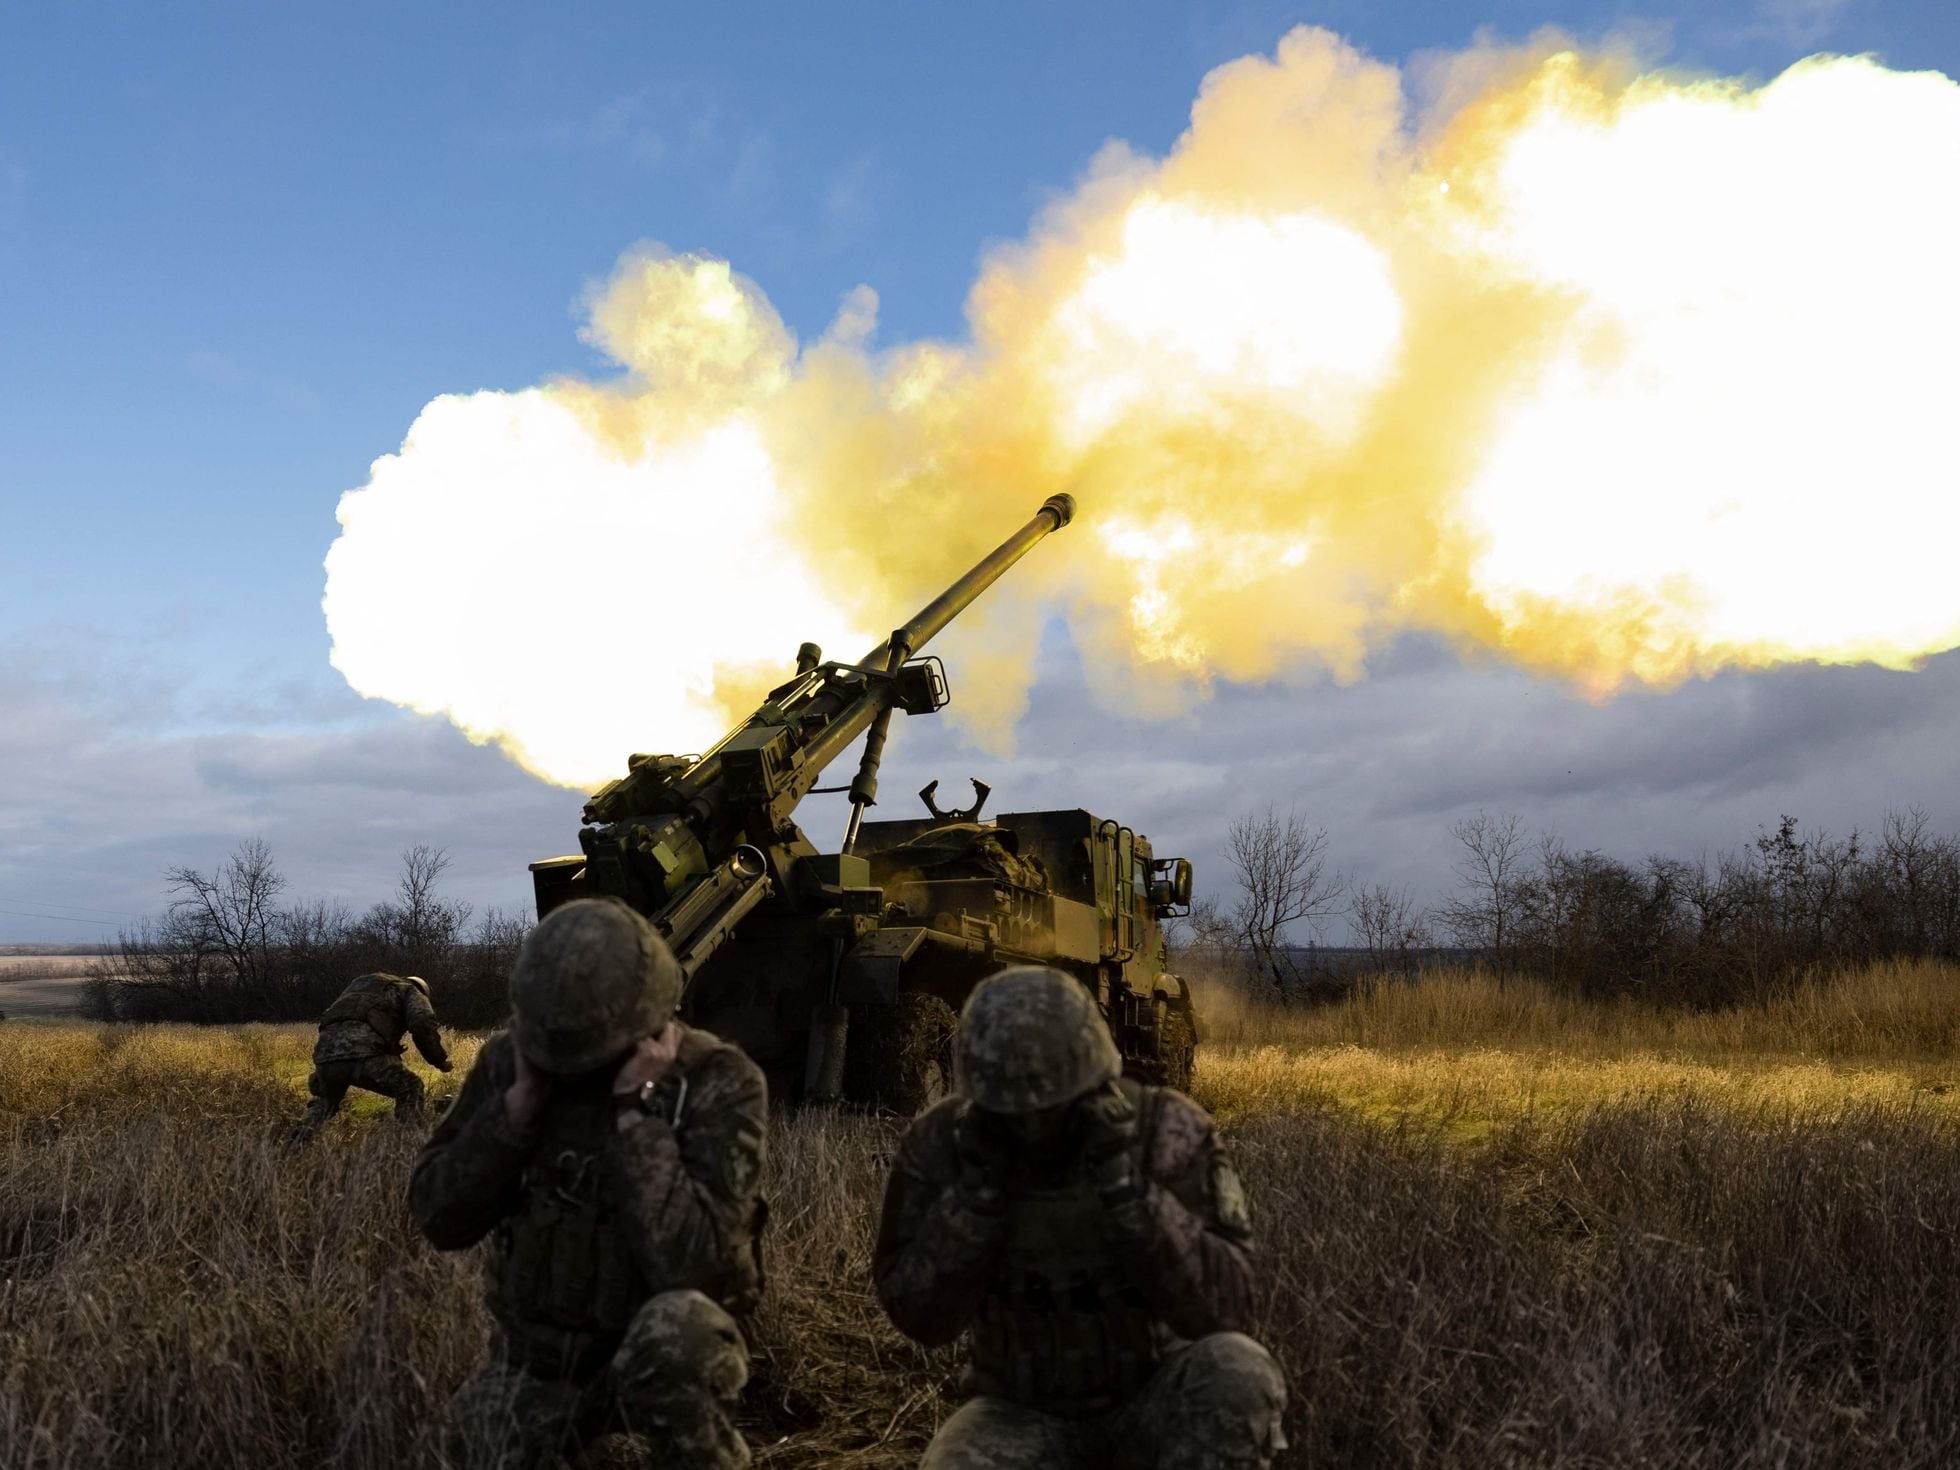 155mm howitzers: The NATO weapon proving crucial to Ukraine's defense, International